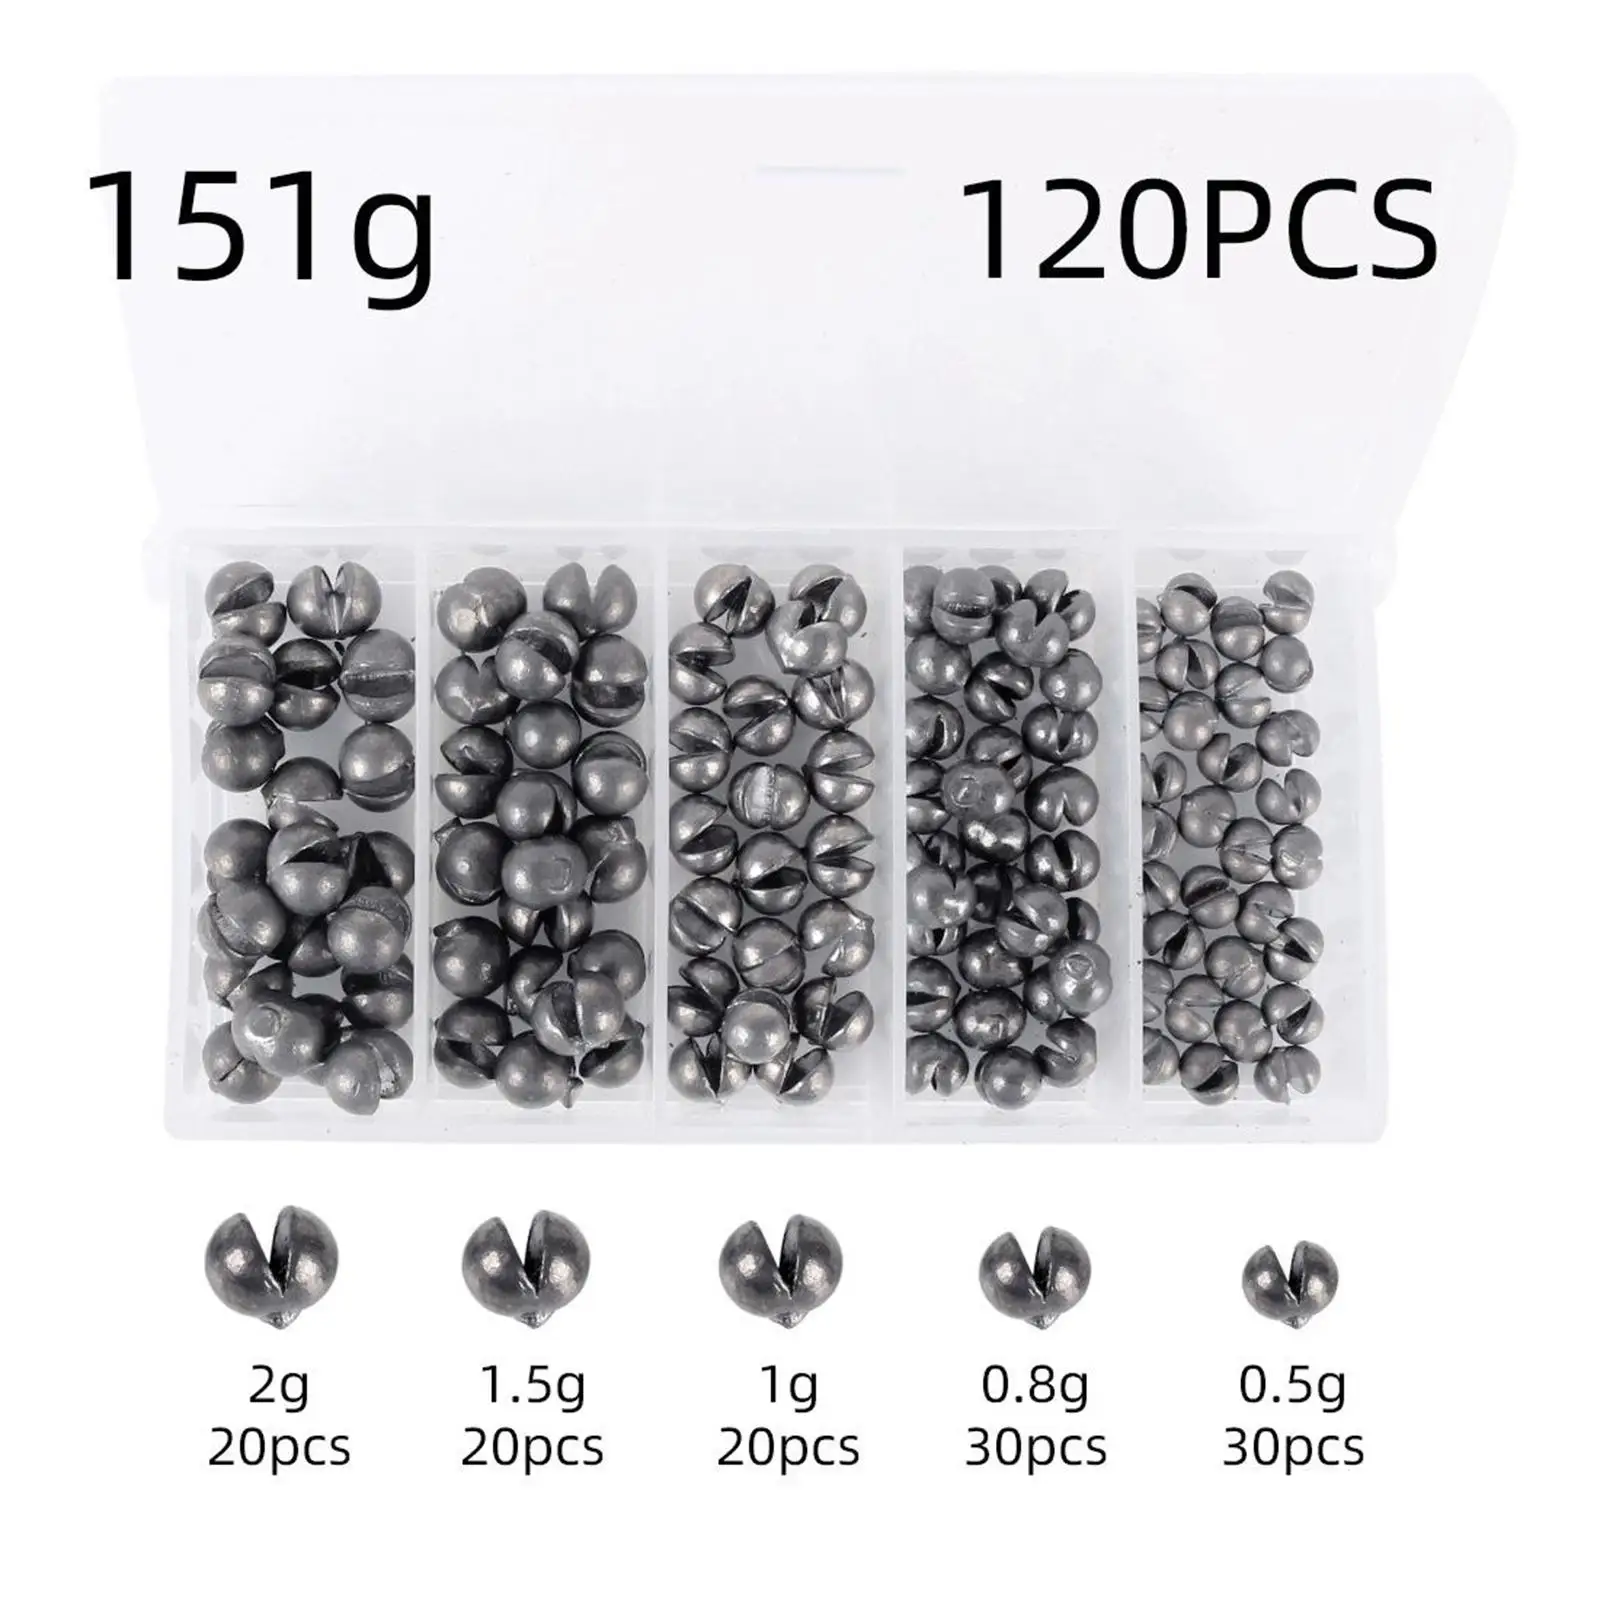 https://ae01.alicdn.com/kf/S61bd63b93e30470d990ede02869913e8k/100-120pcs-Fishing-Weights-Round-Sinker-Fishing-Weights-Egg-Sinkers-with-Storage-Box-5-Sizes.jpg